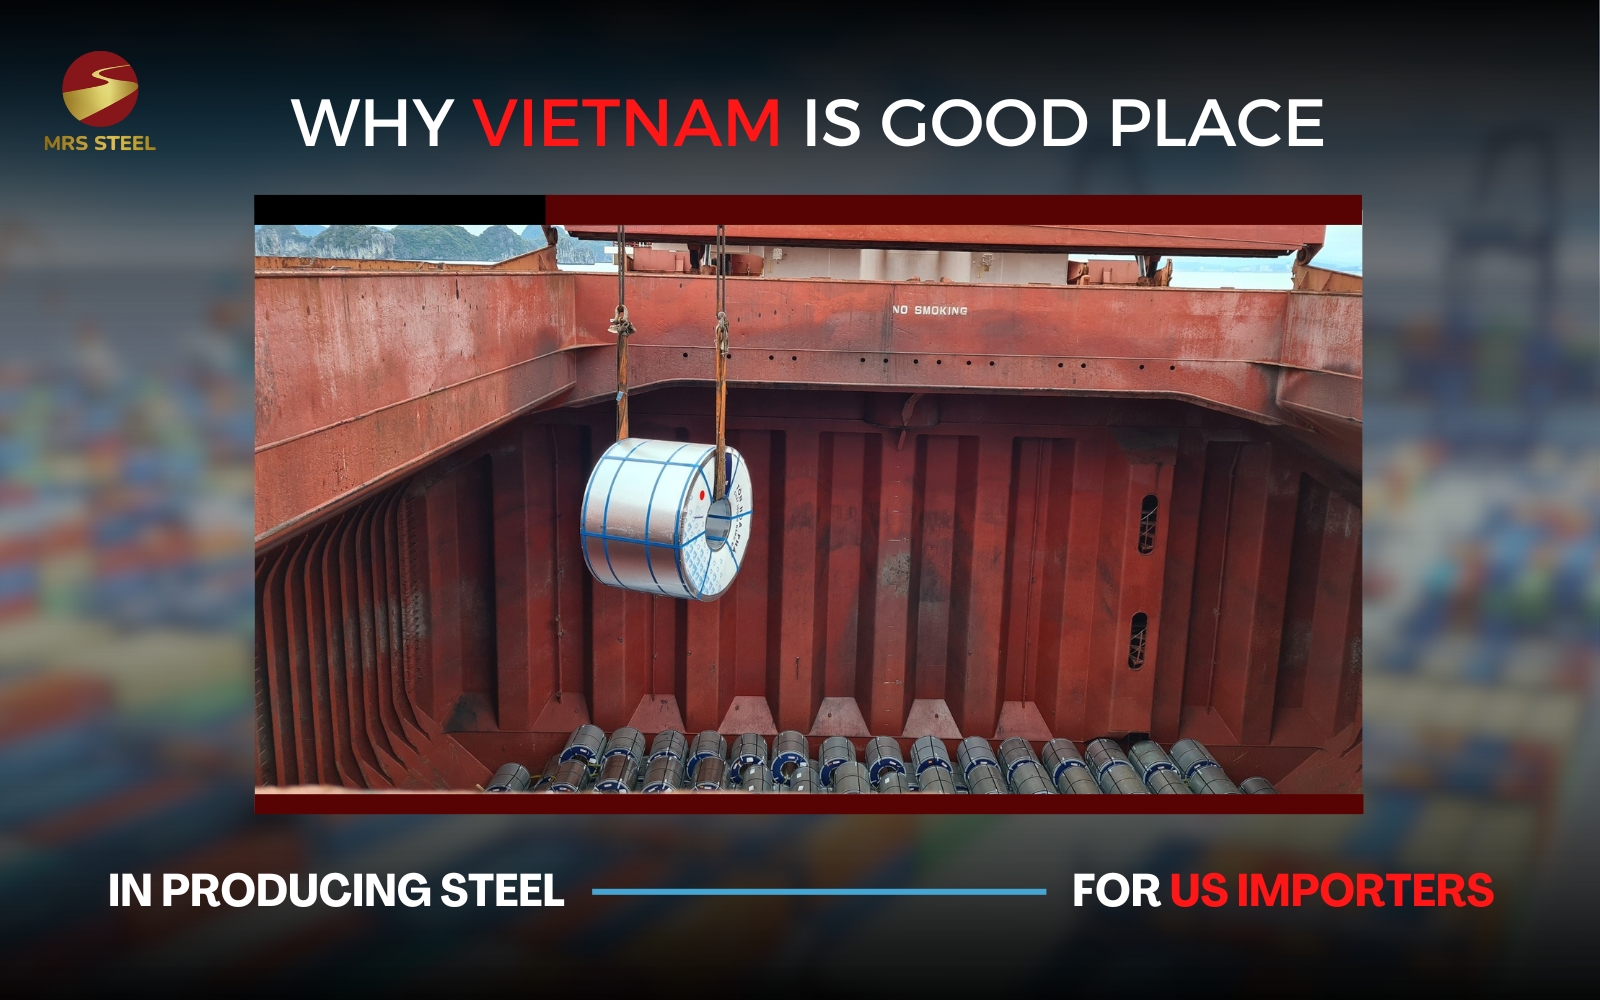 Why Vietnam is a good place in producing steel for US importers